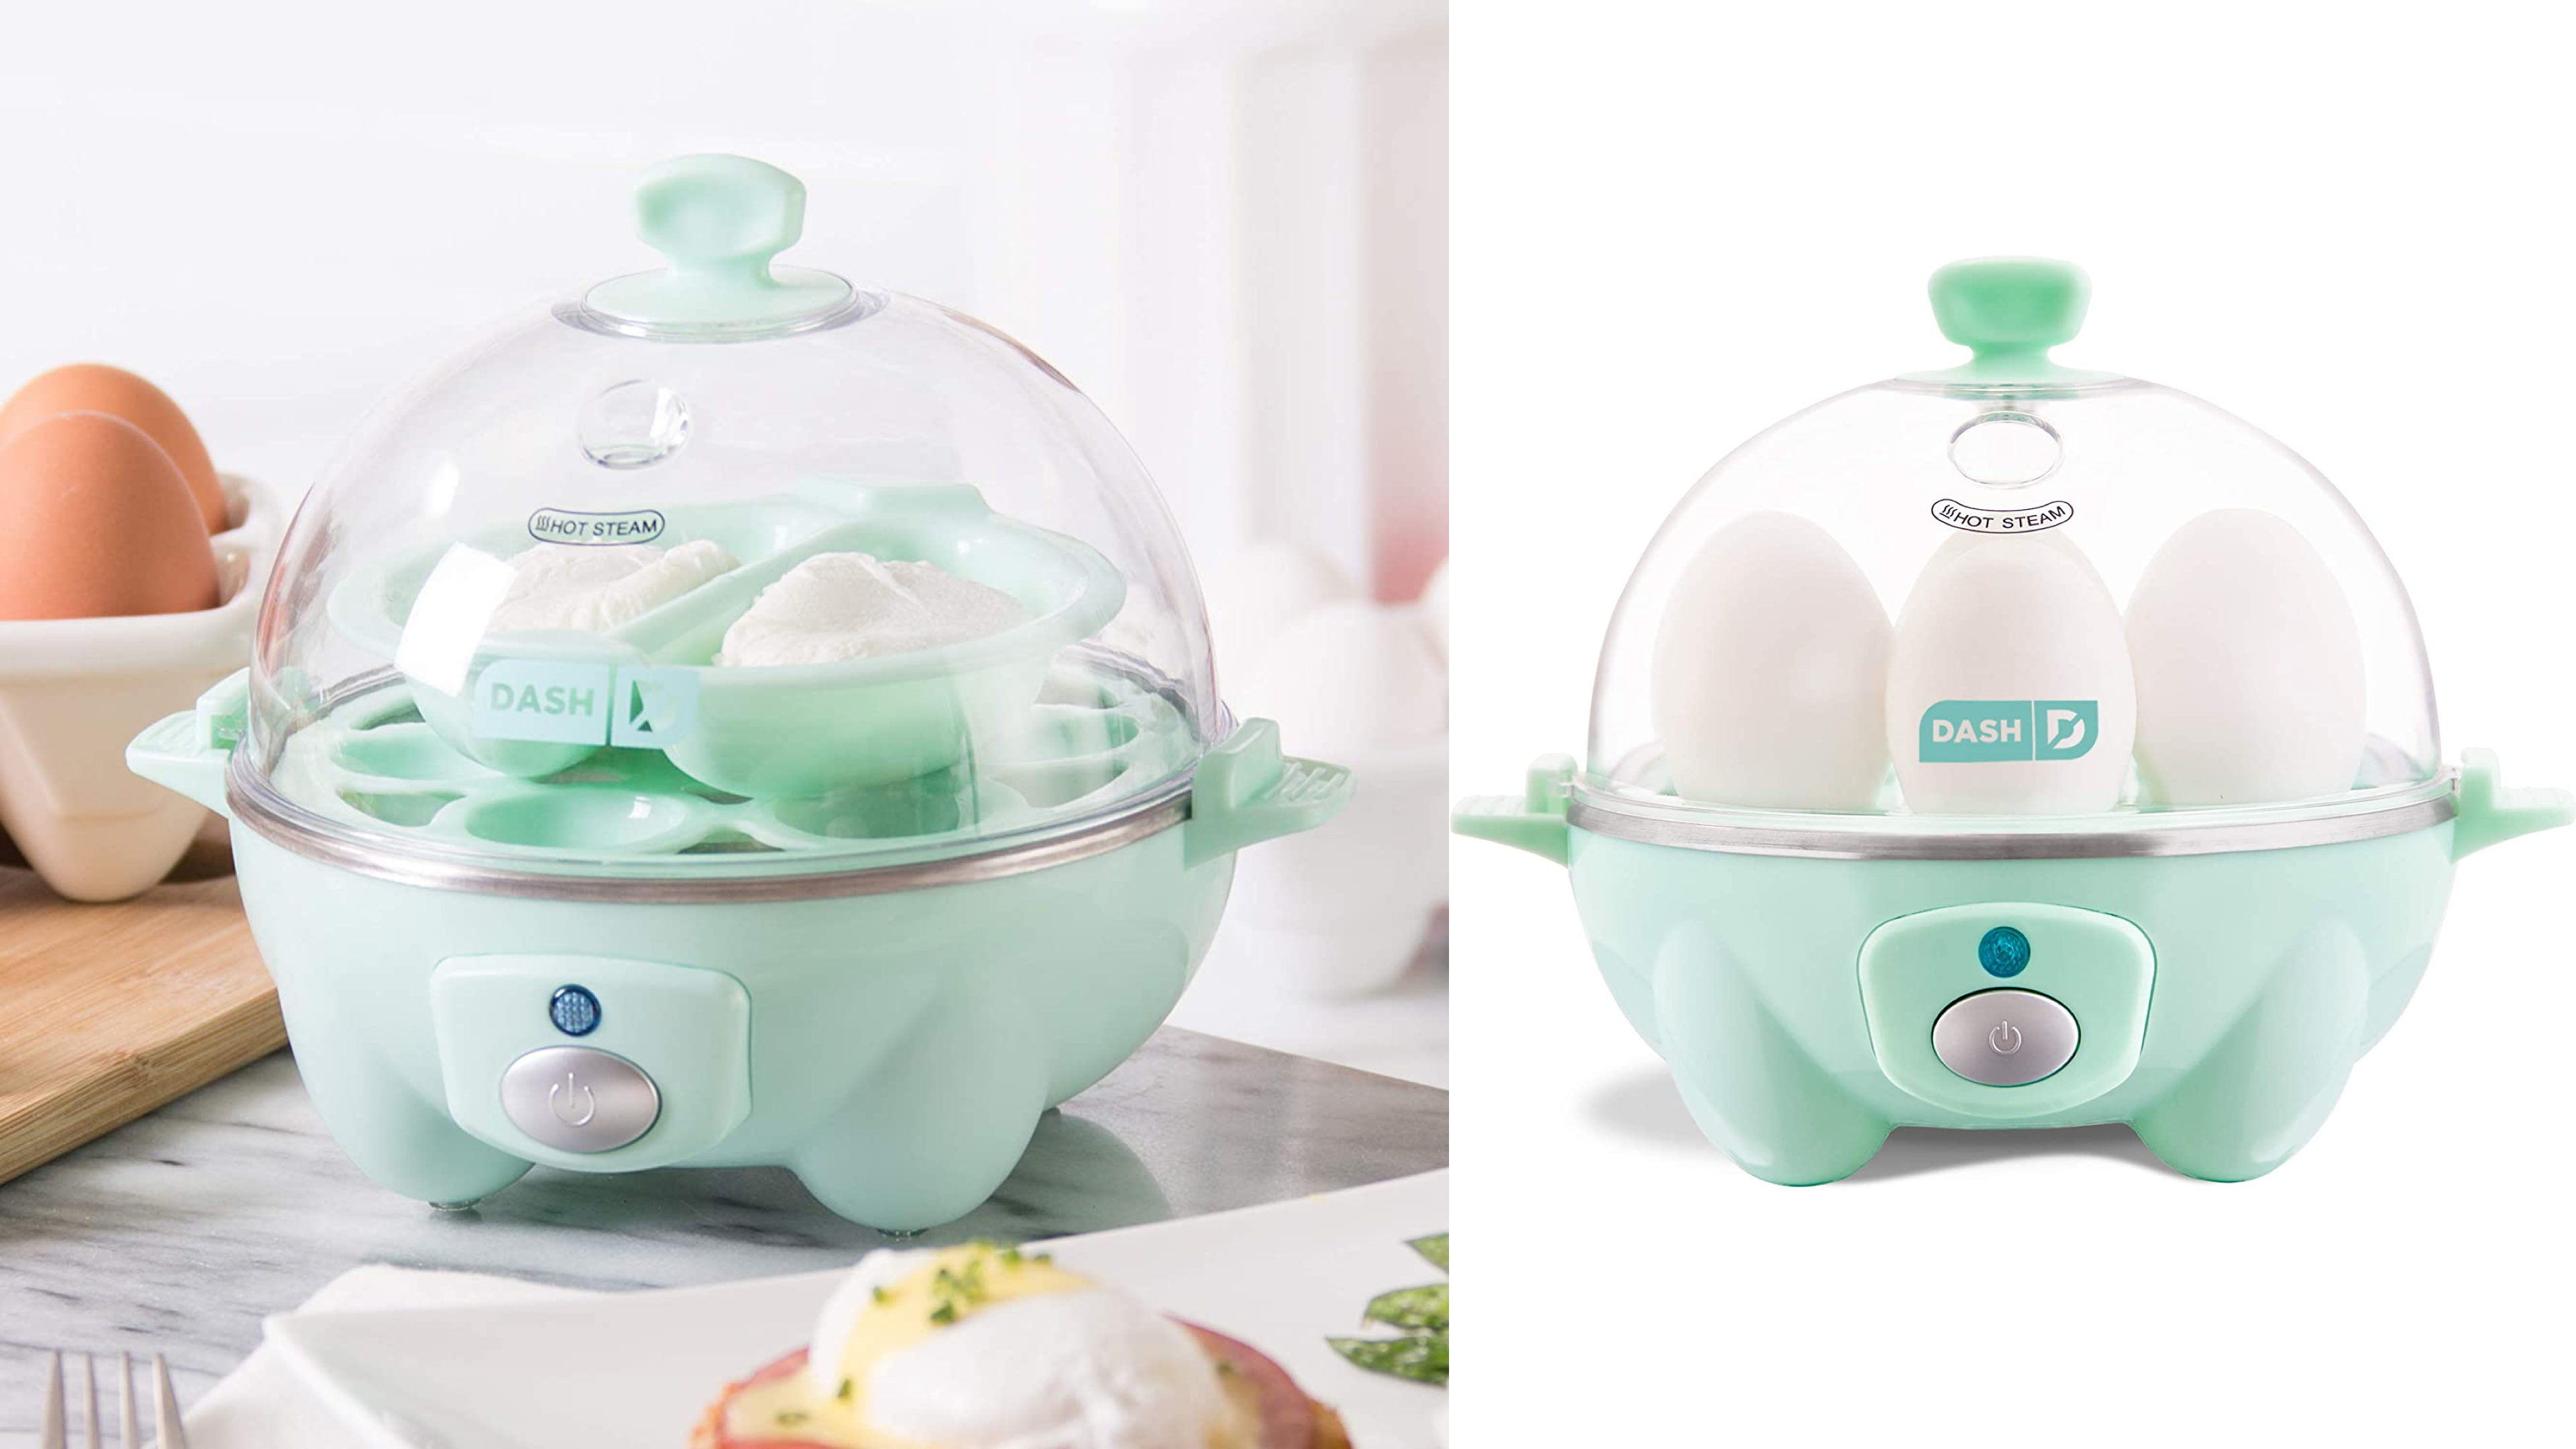 dash rapid egg cooker cooks eggs quickly, hard-boiled, omelette, or poached